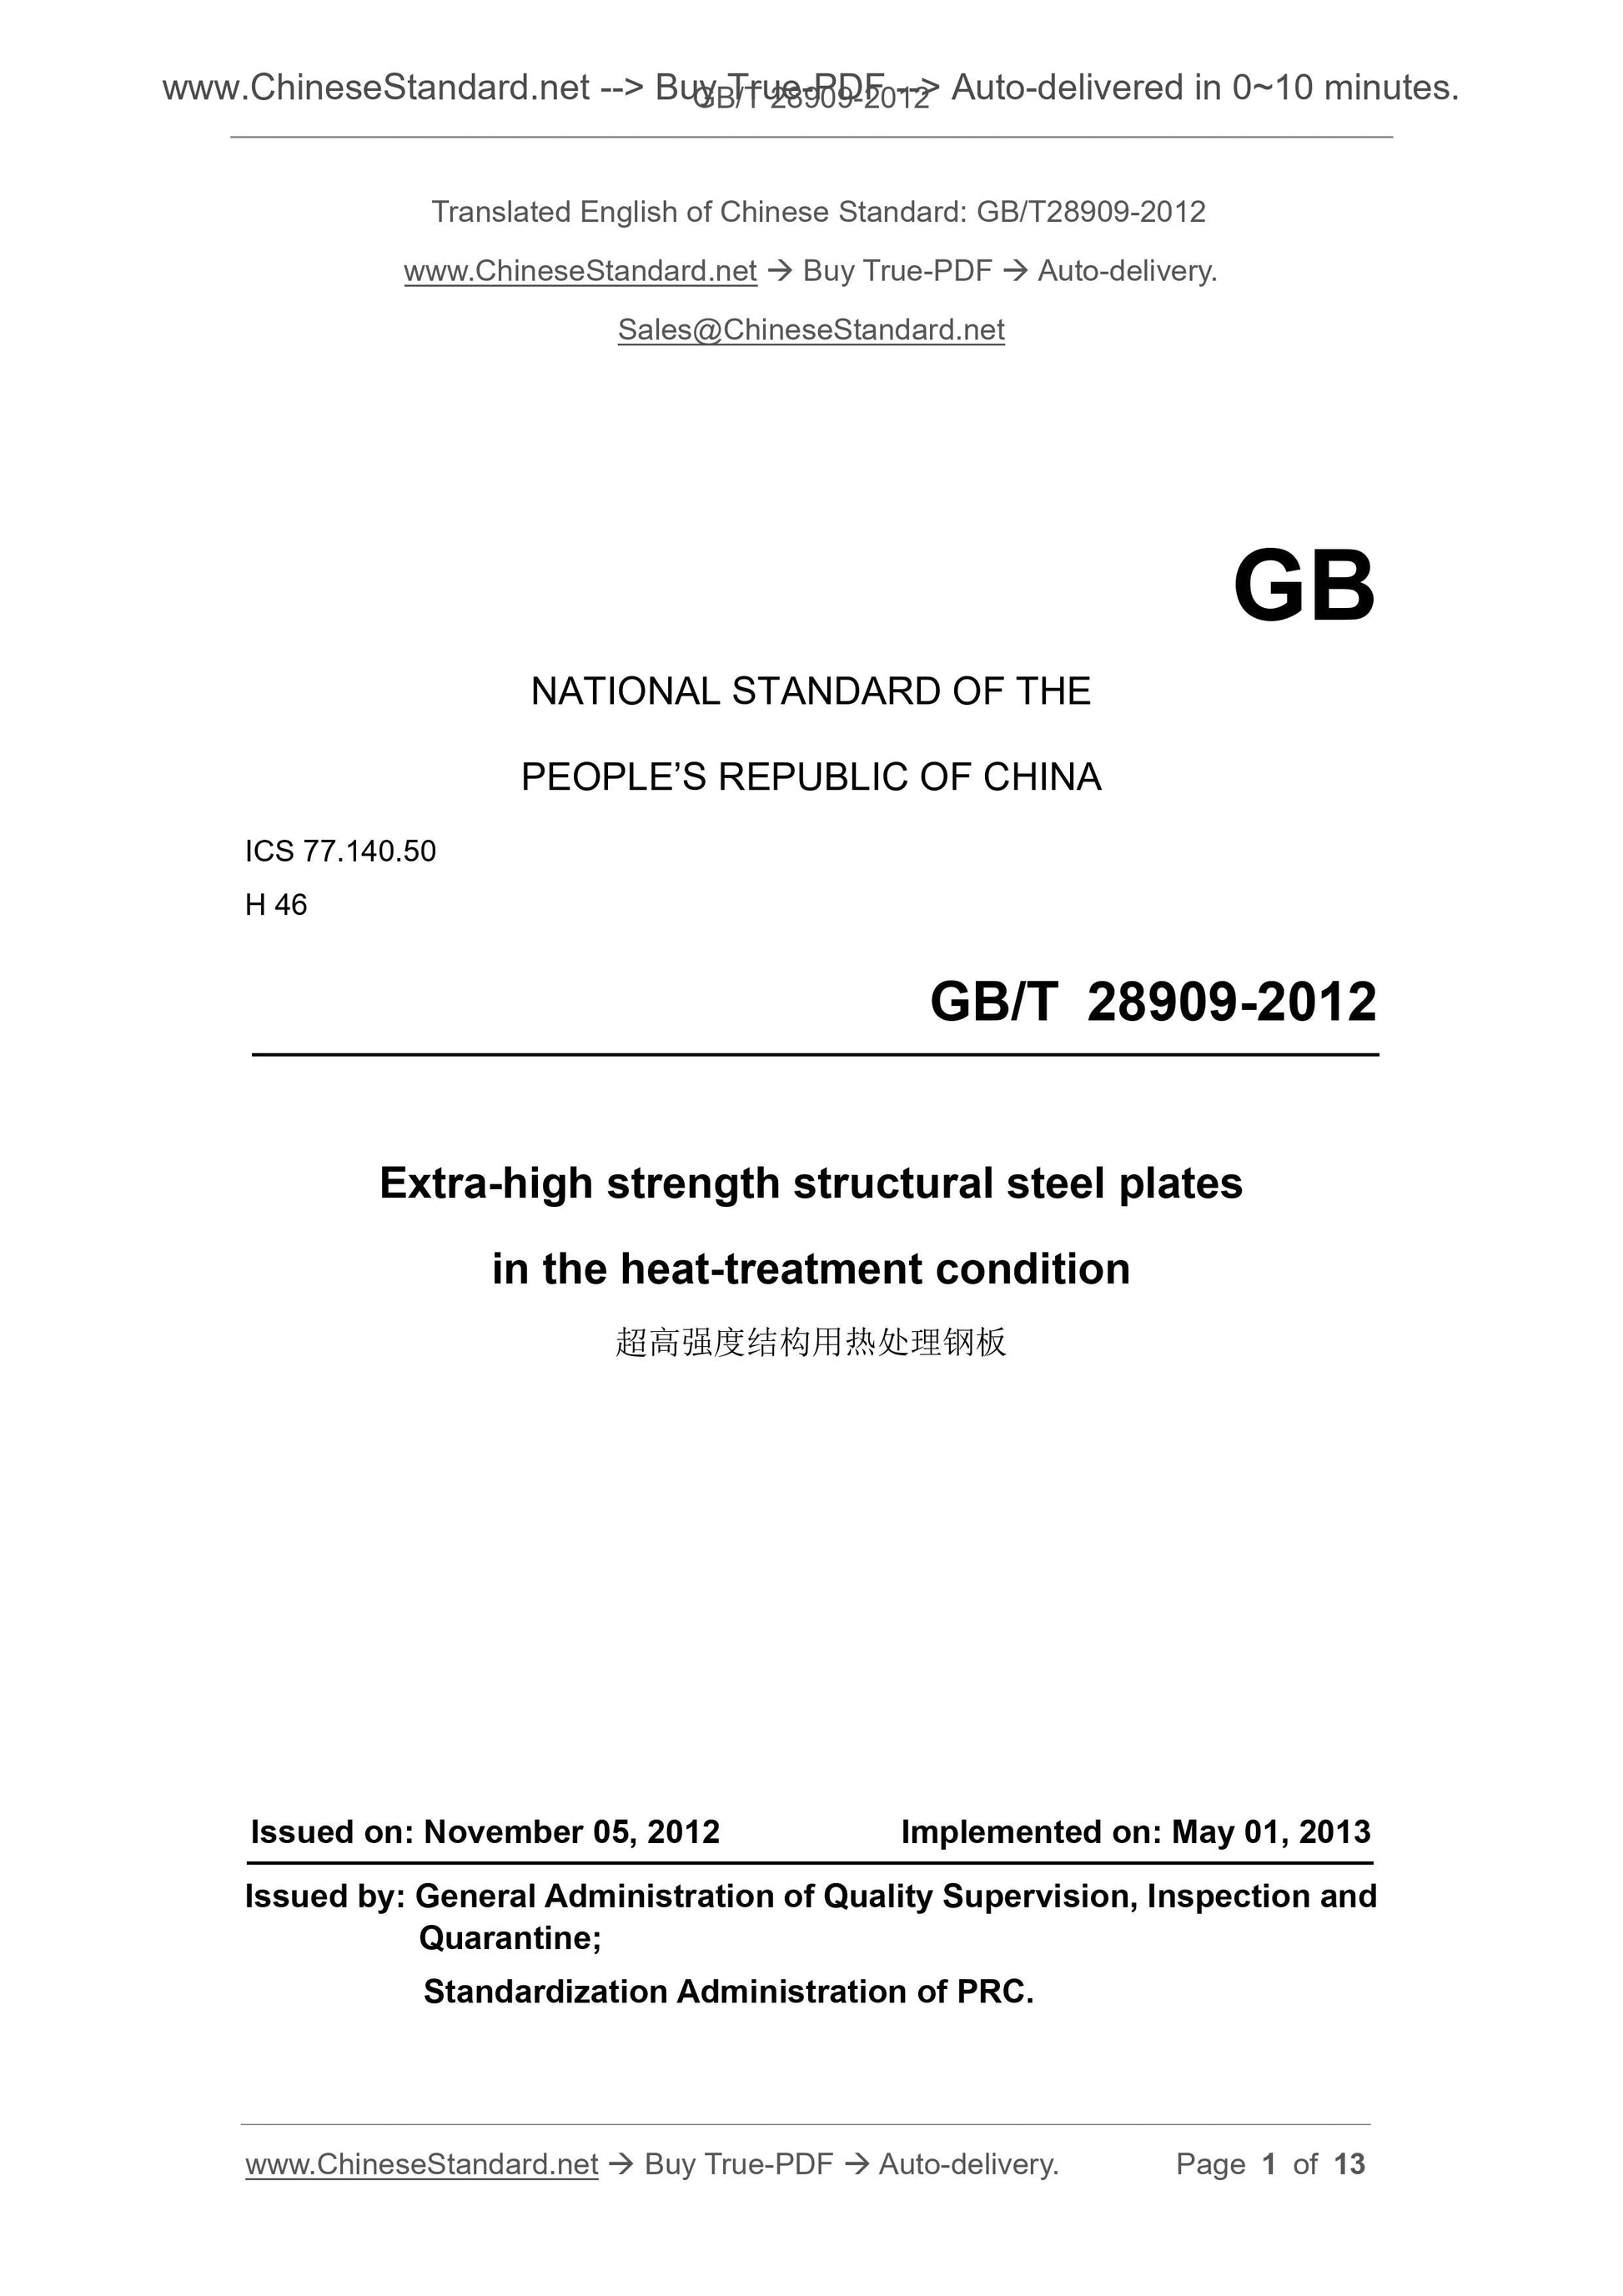 GB/T 28909-2012 Page 1